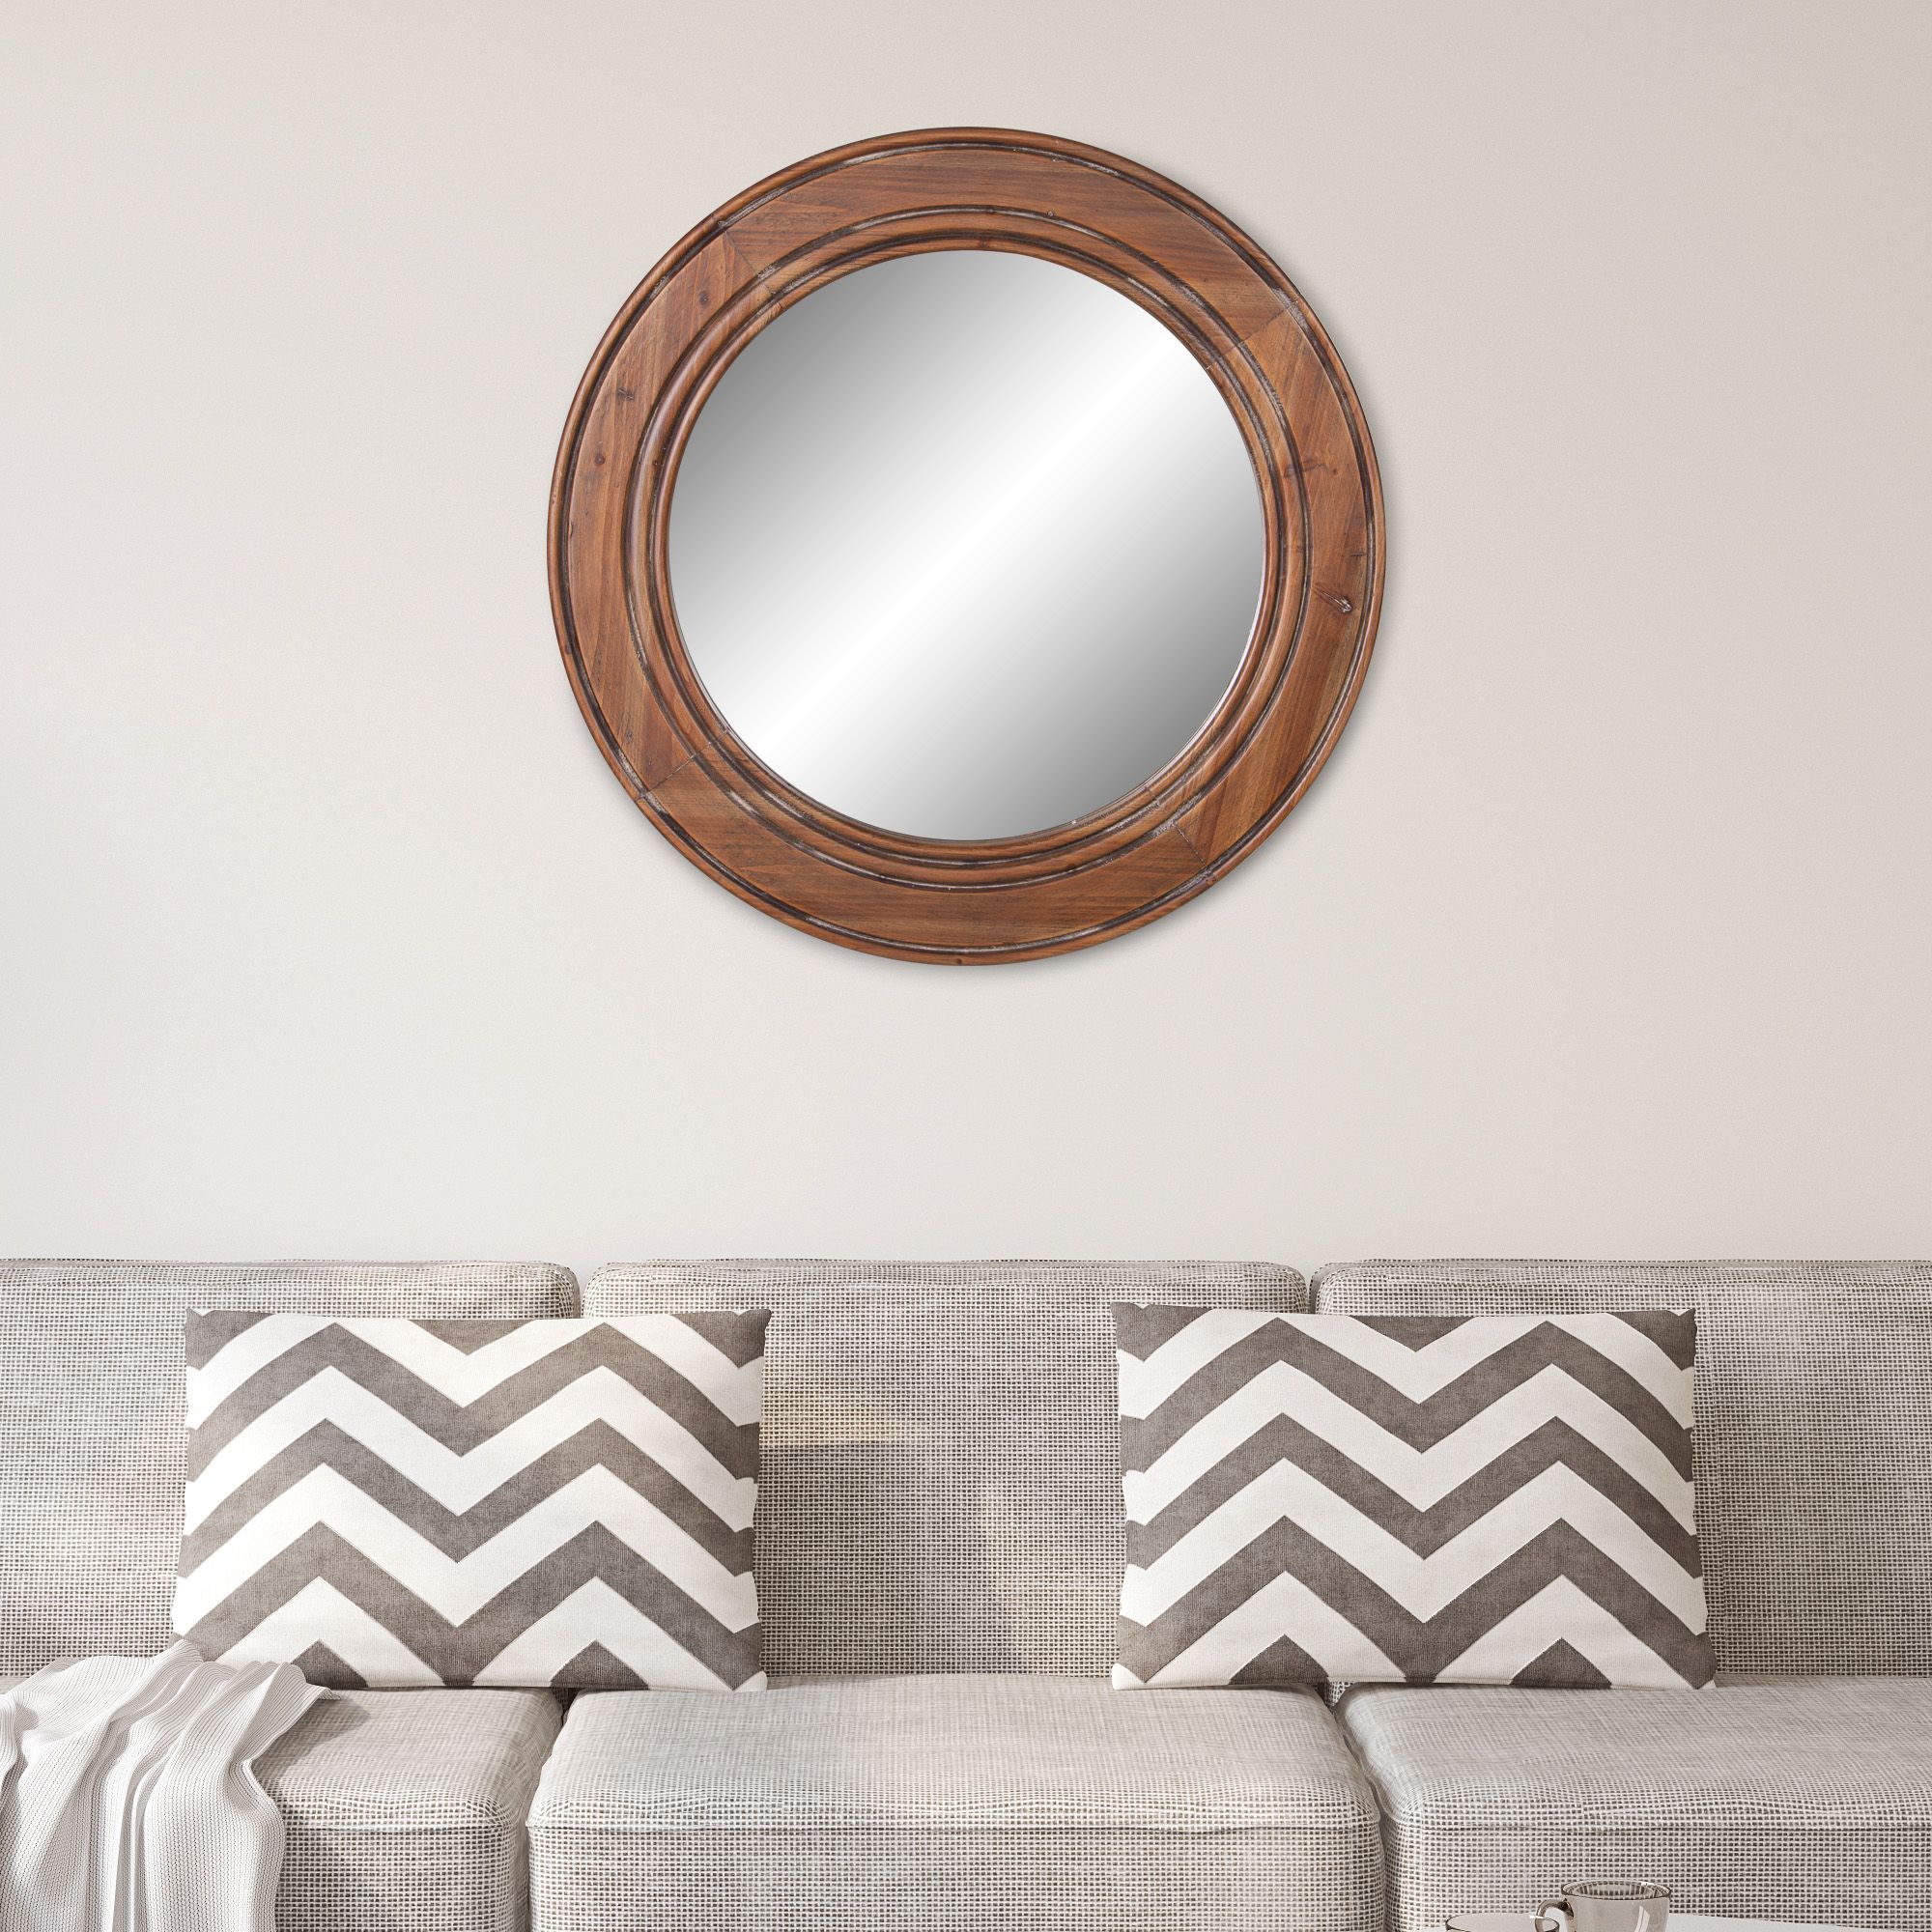 Reclaimed Wood Large Round Wall Accent Mirror 23"x23"patton Wall Within Wood Rounded Side Rectangular Wall Mirrors (View 3 of 15)